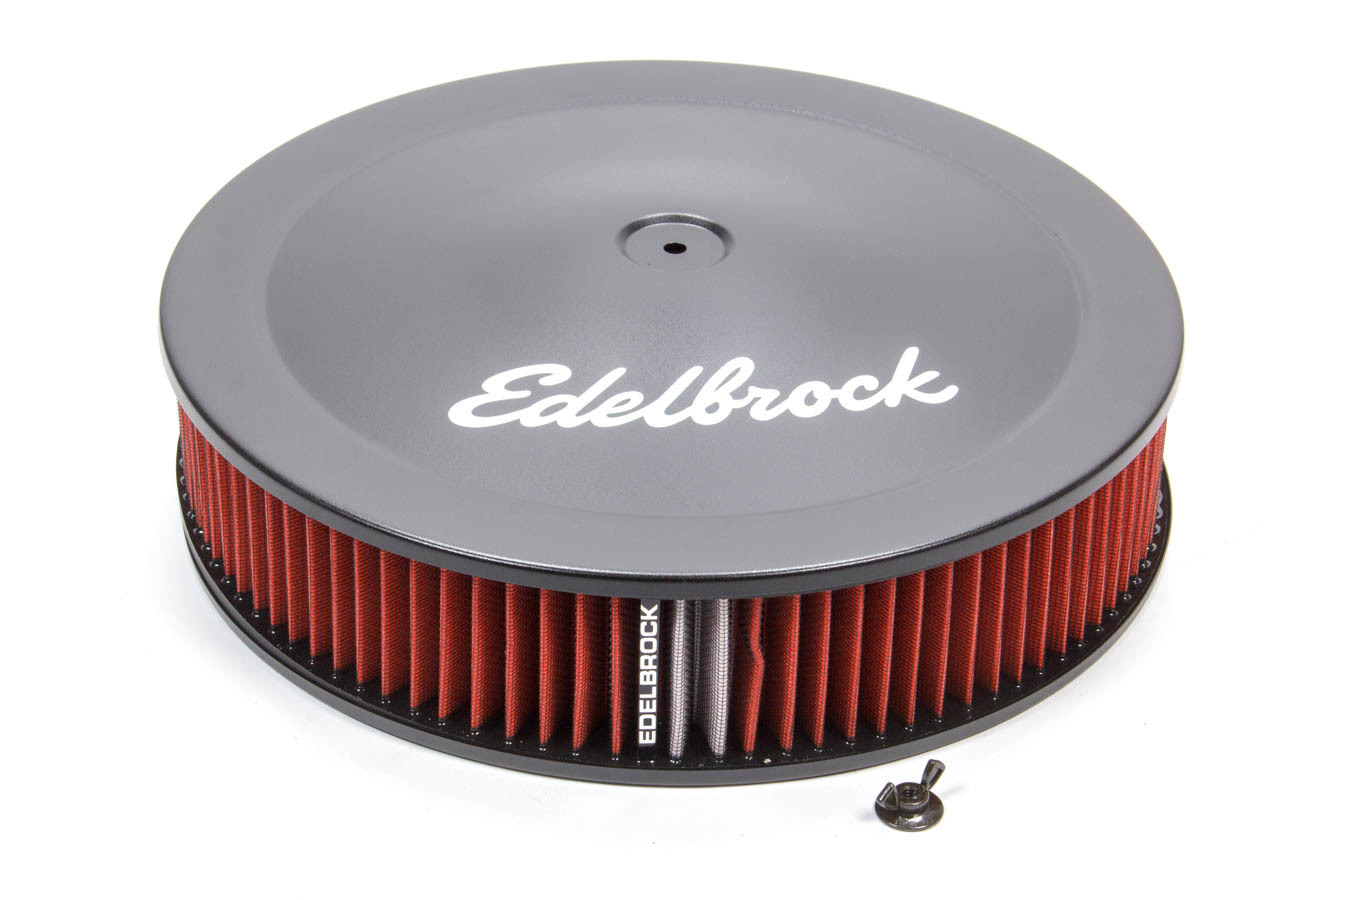 Edelbrock 1225 Air Cleaner Assembly, Pro-Flo, 14 in Round, 3 in Tall, 5-1/8 in Carb Flange, Drop Base, Red Cotton, Steel, Black Powder Coat, Kit